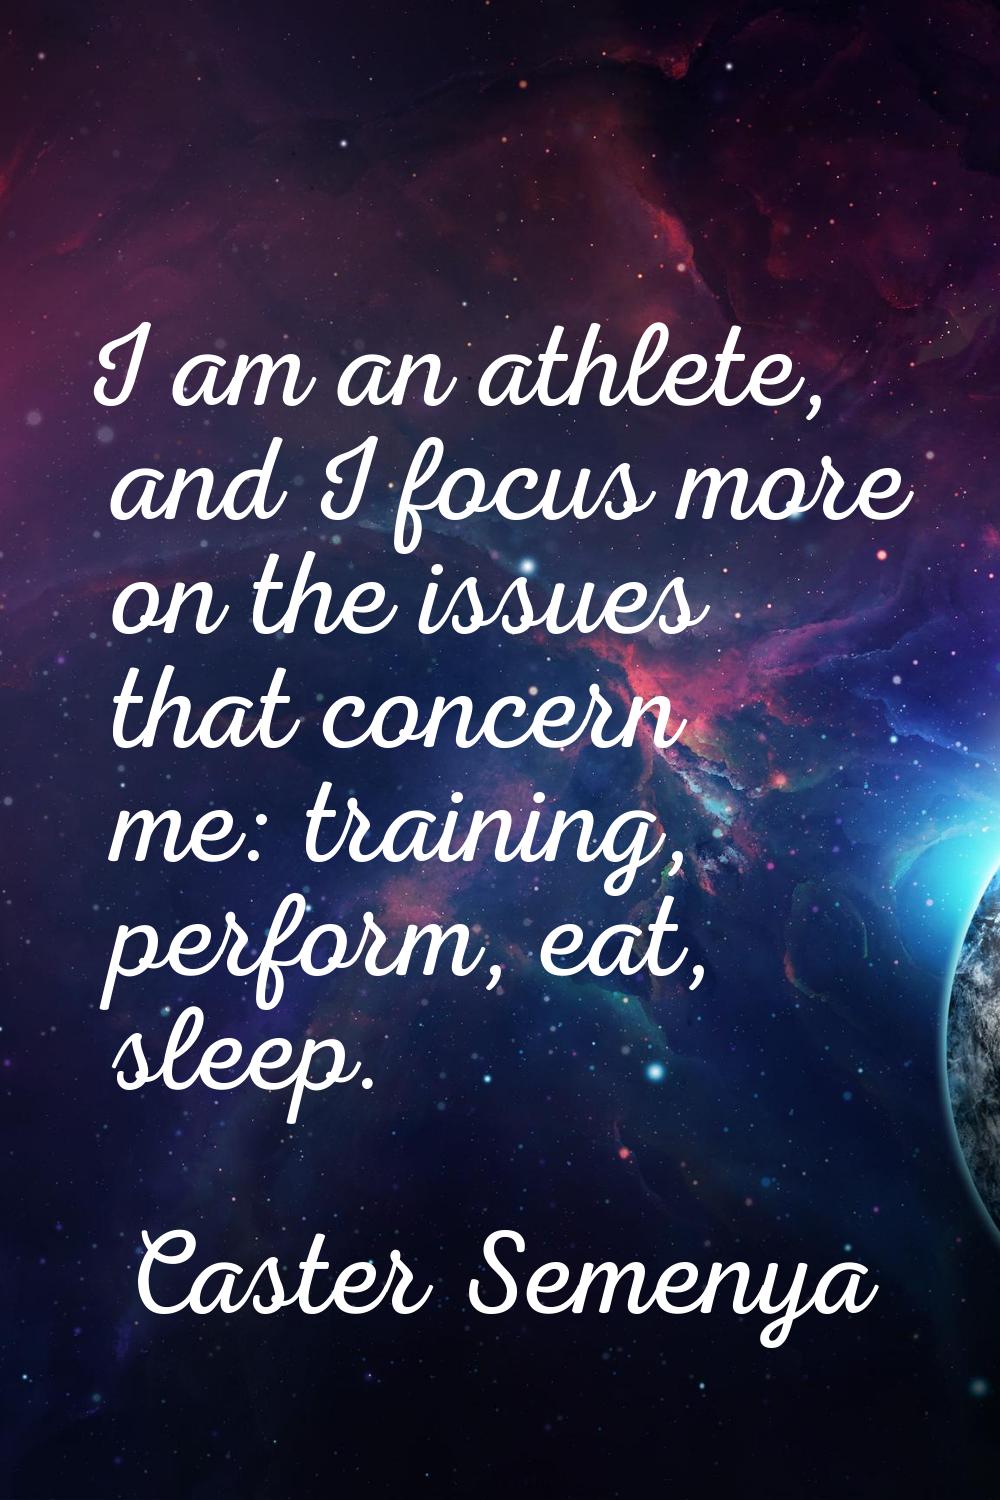 I am an athlete, and I focus more on the issues that concern me: training, perform, eat, sleep.